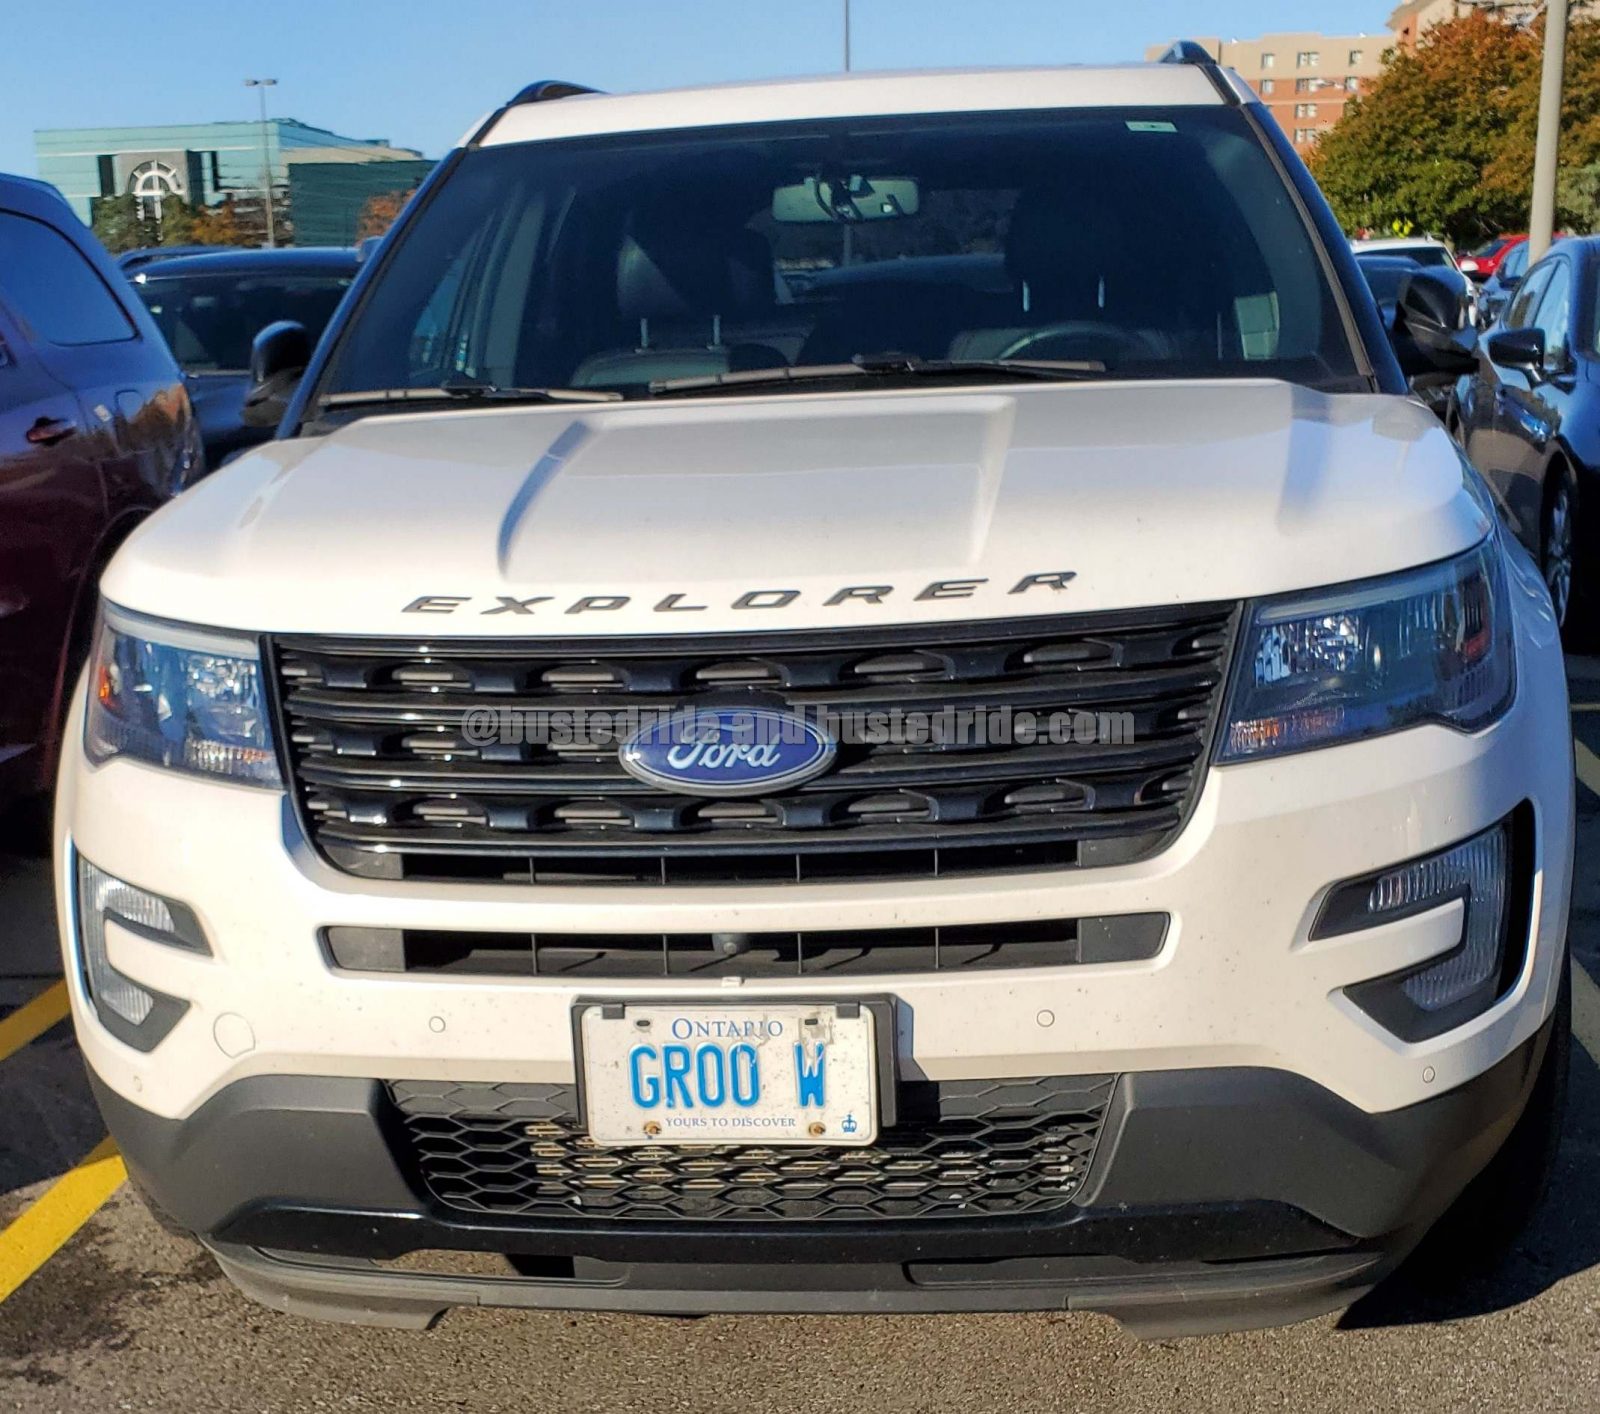 GROO W - Vanity License Plate by Busted Ride